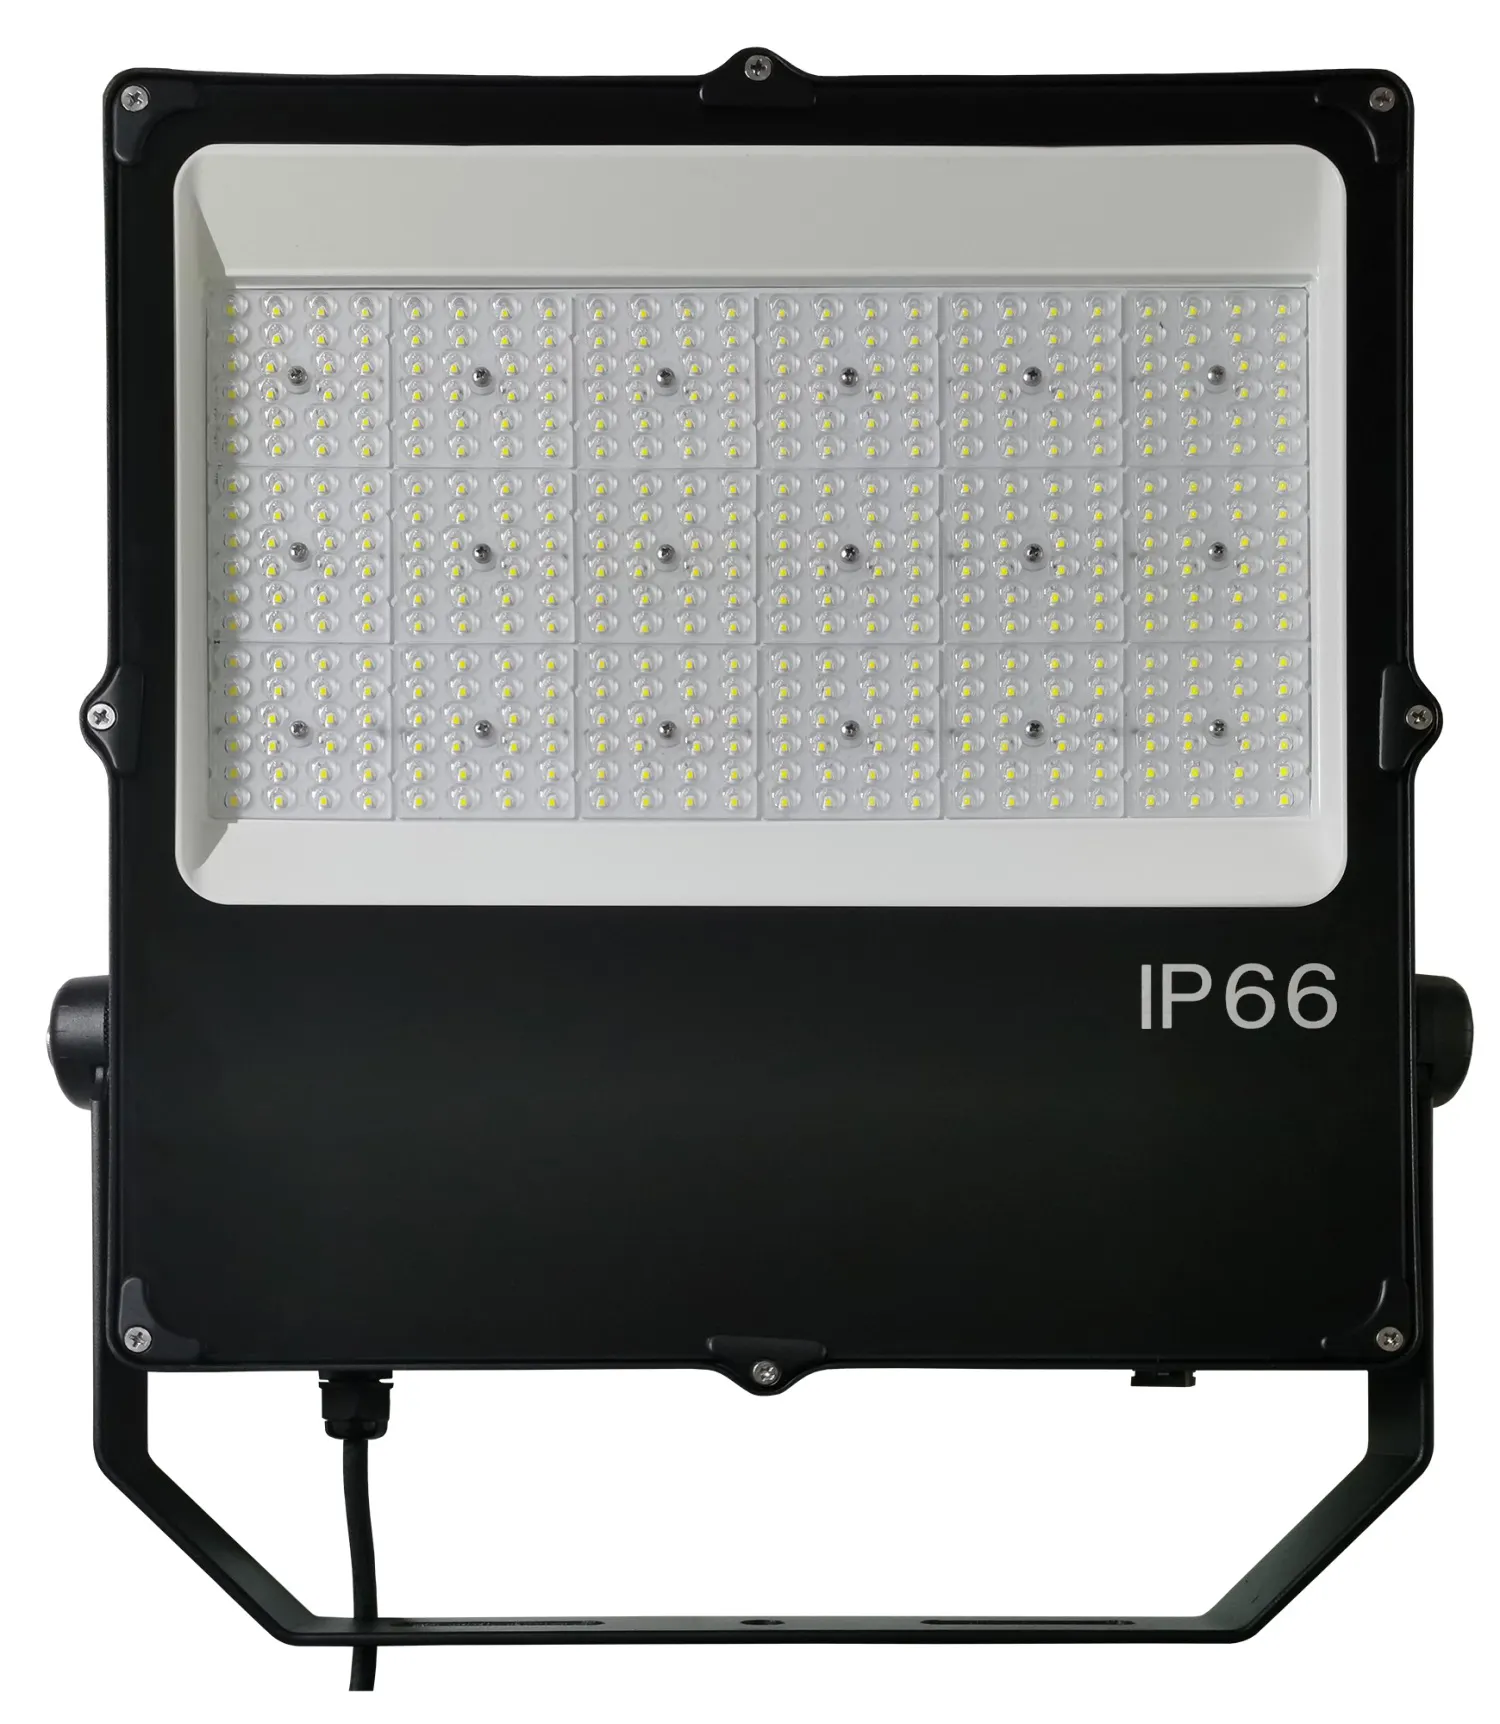 New Industrial Light IP66 25W-300W slim led flood light 160lm/w outdoor light 5 Years Warrant with CE ROHS CB SAA